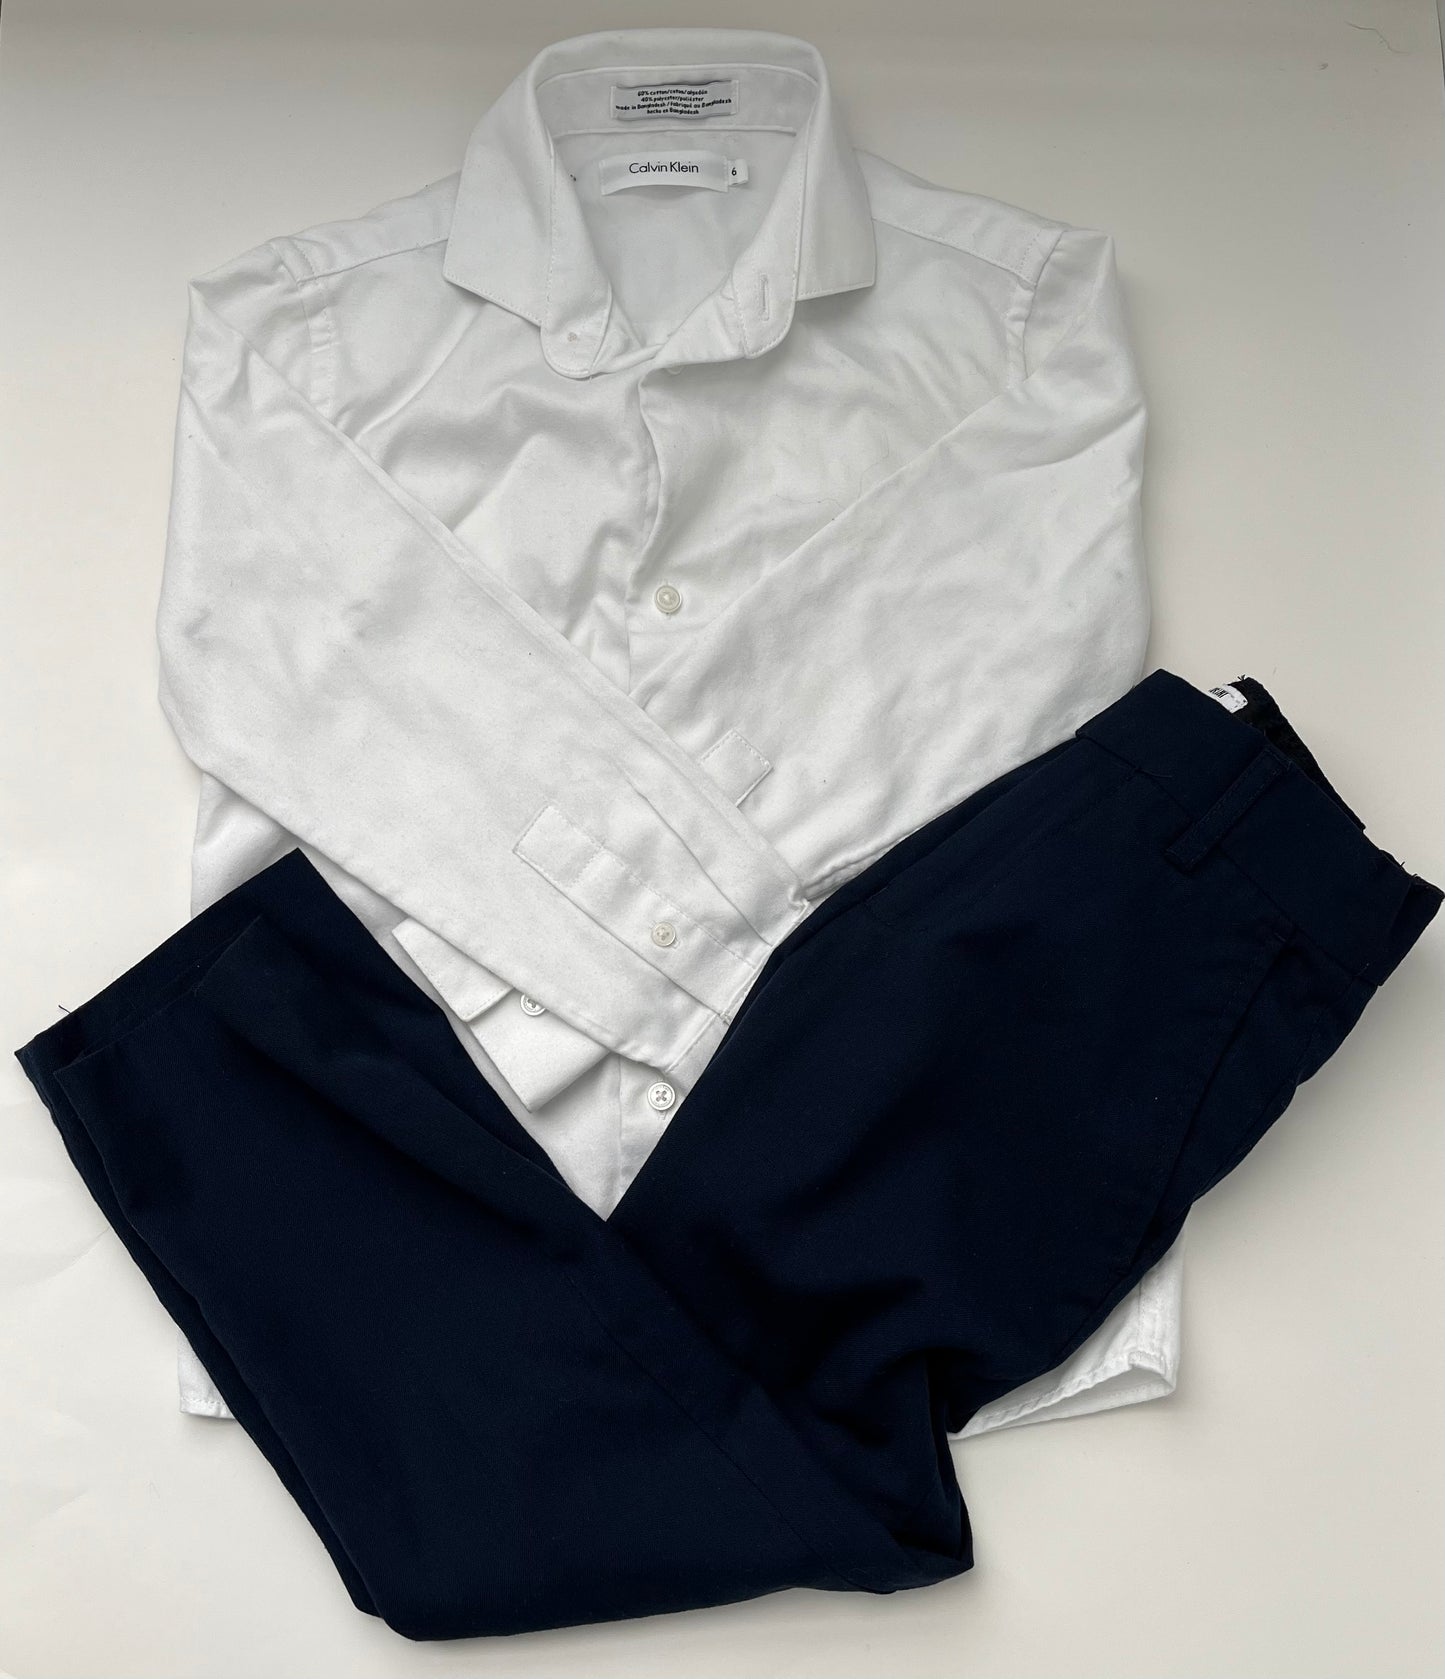 Boys size 6 white dress shirt and suit pants (45244)